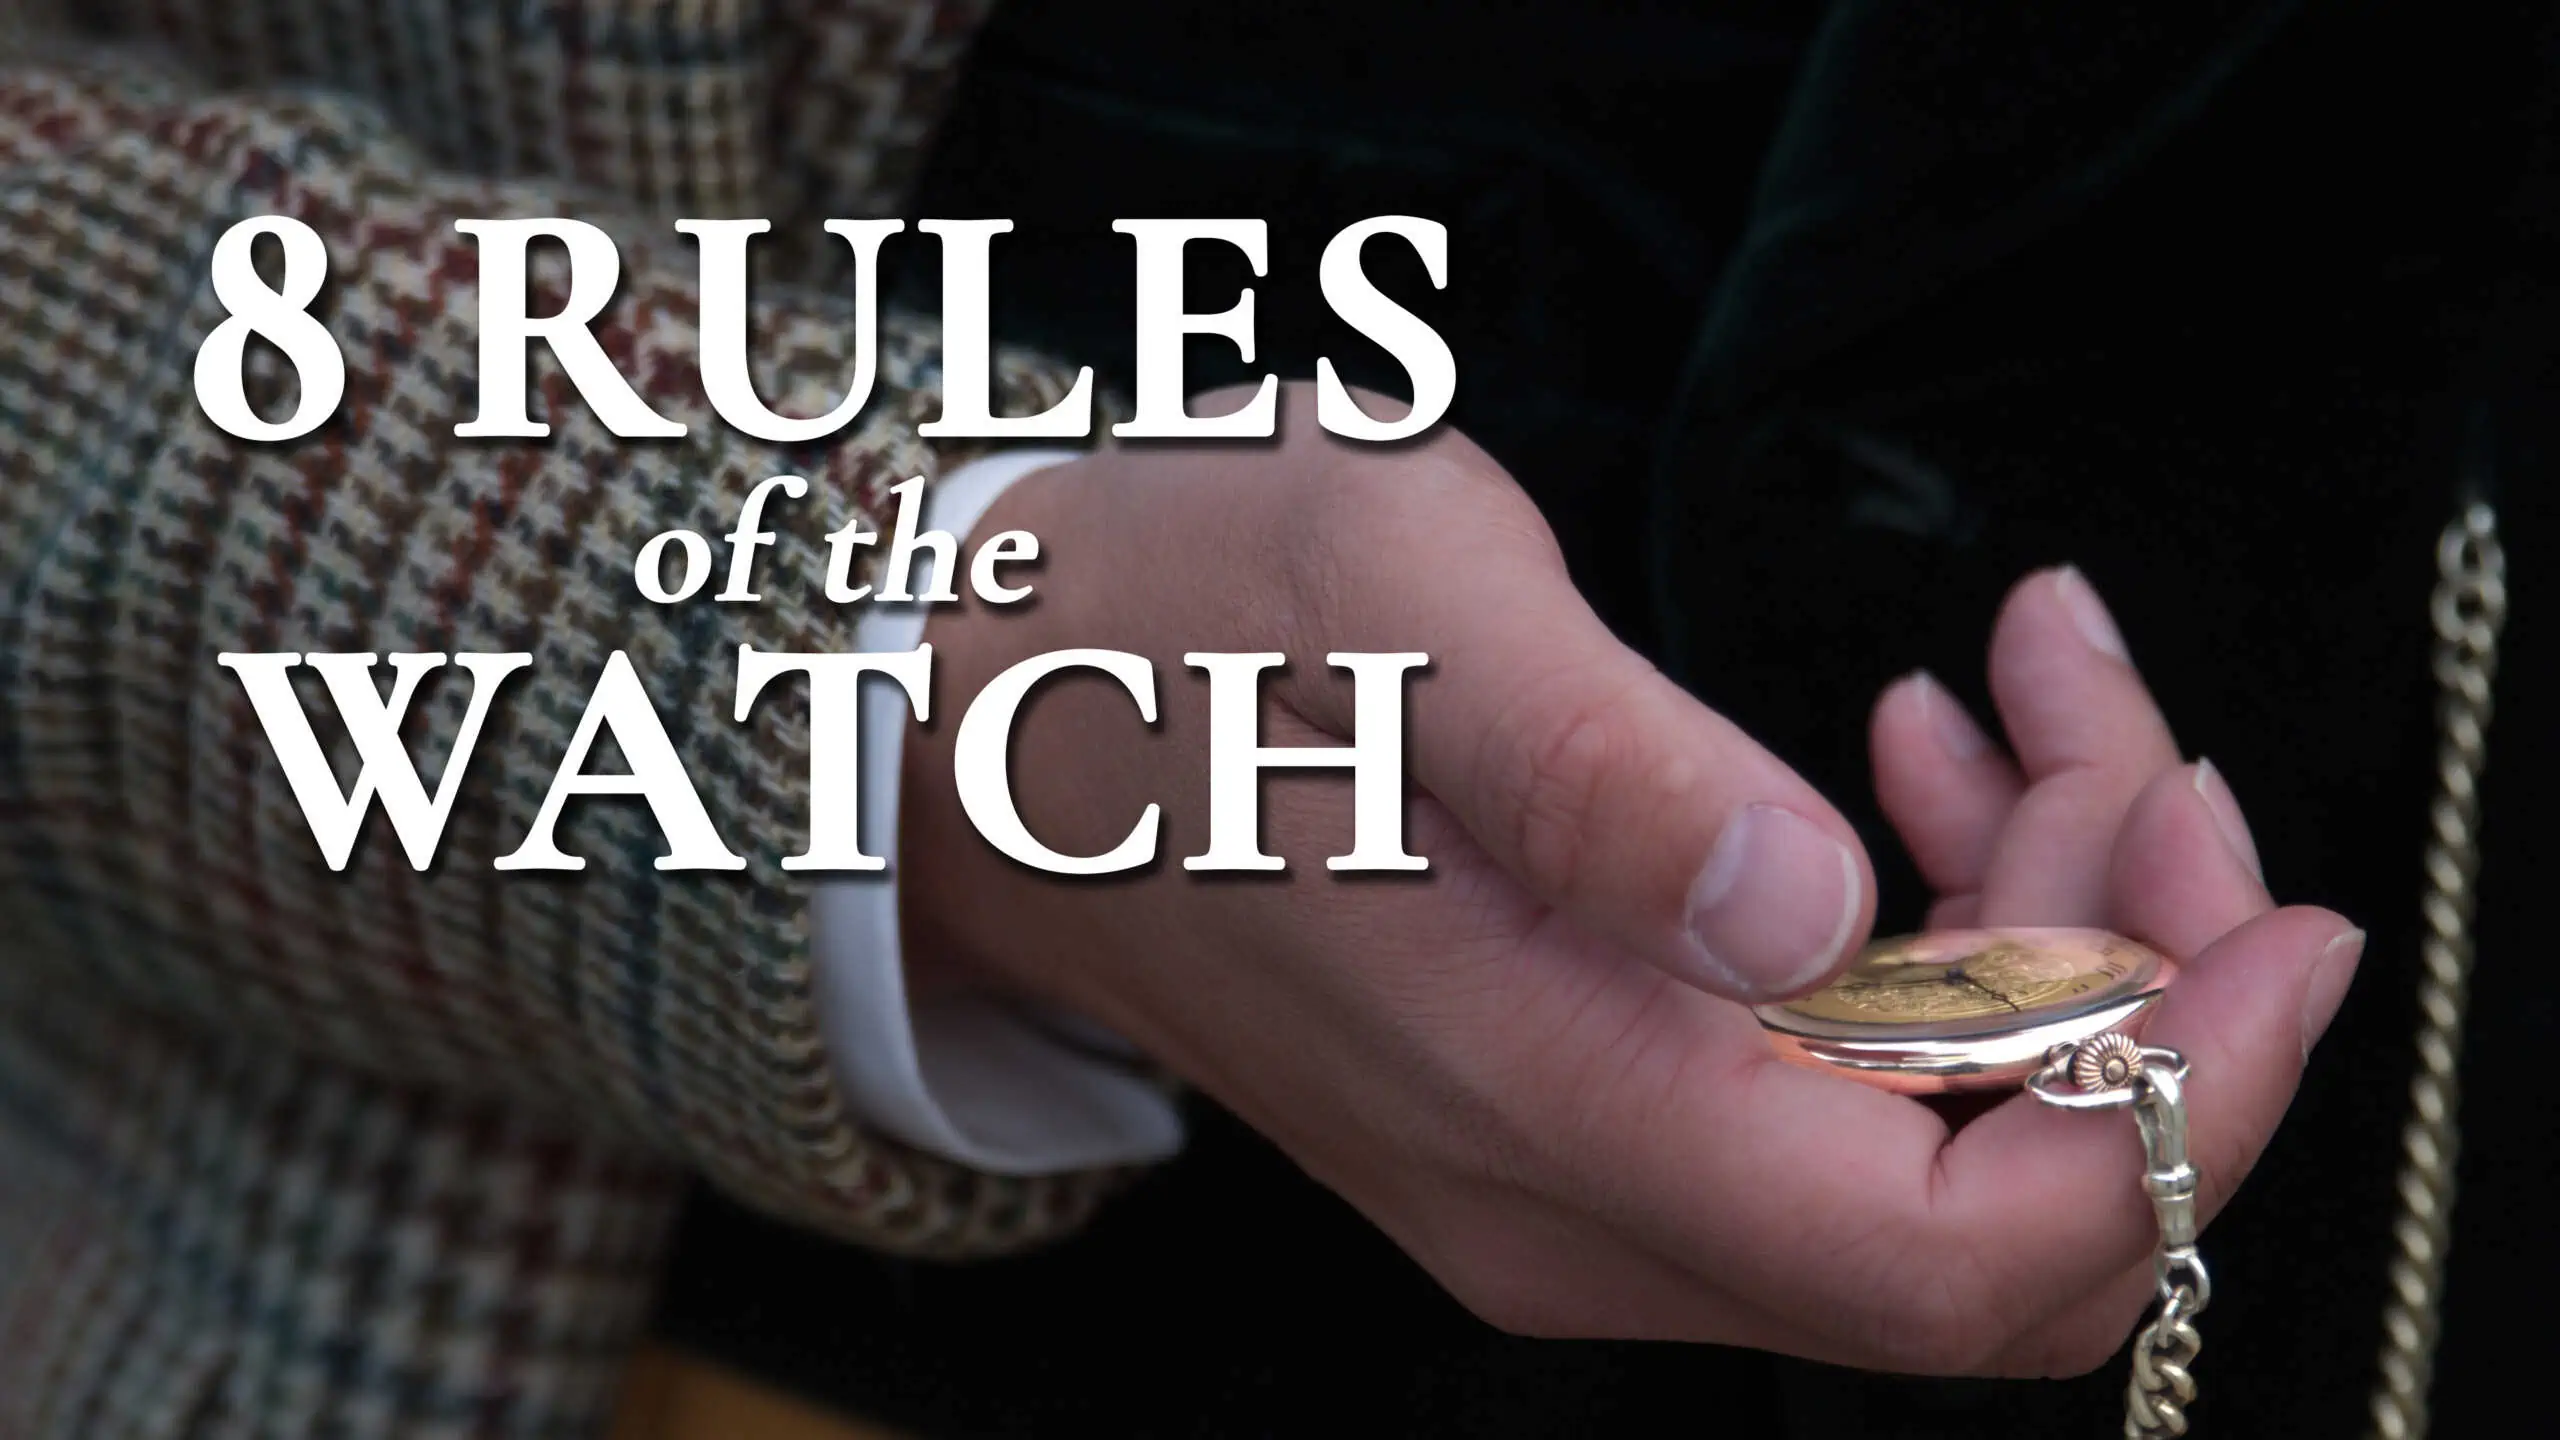 8 rules of the watch 3840x2160 wp scaled